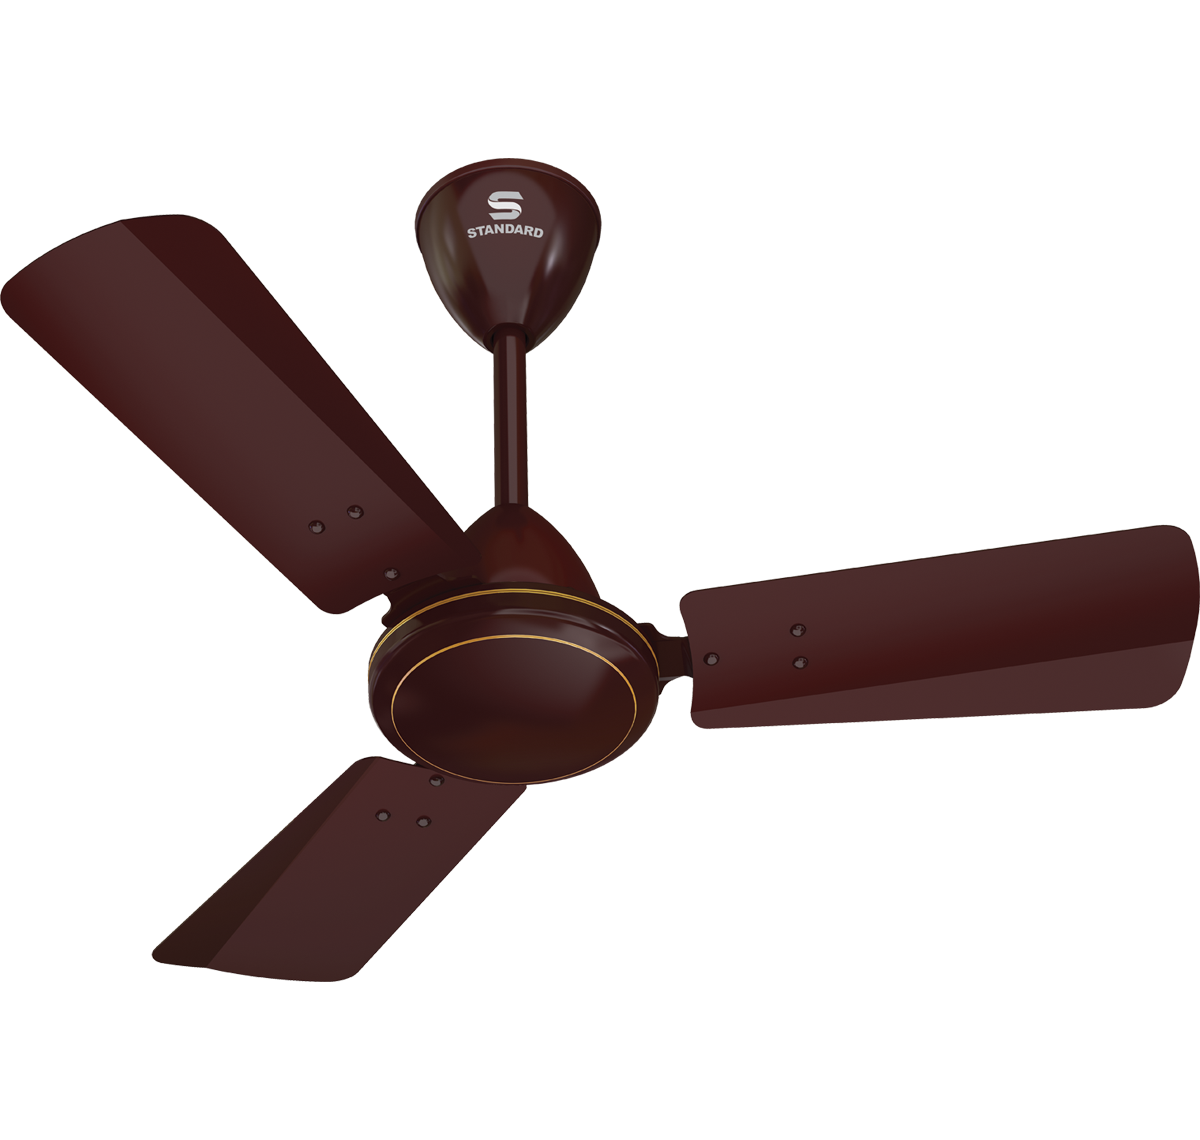 Best Ceiling Fans India Small Ceiling Fans Online Price